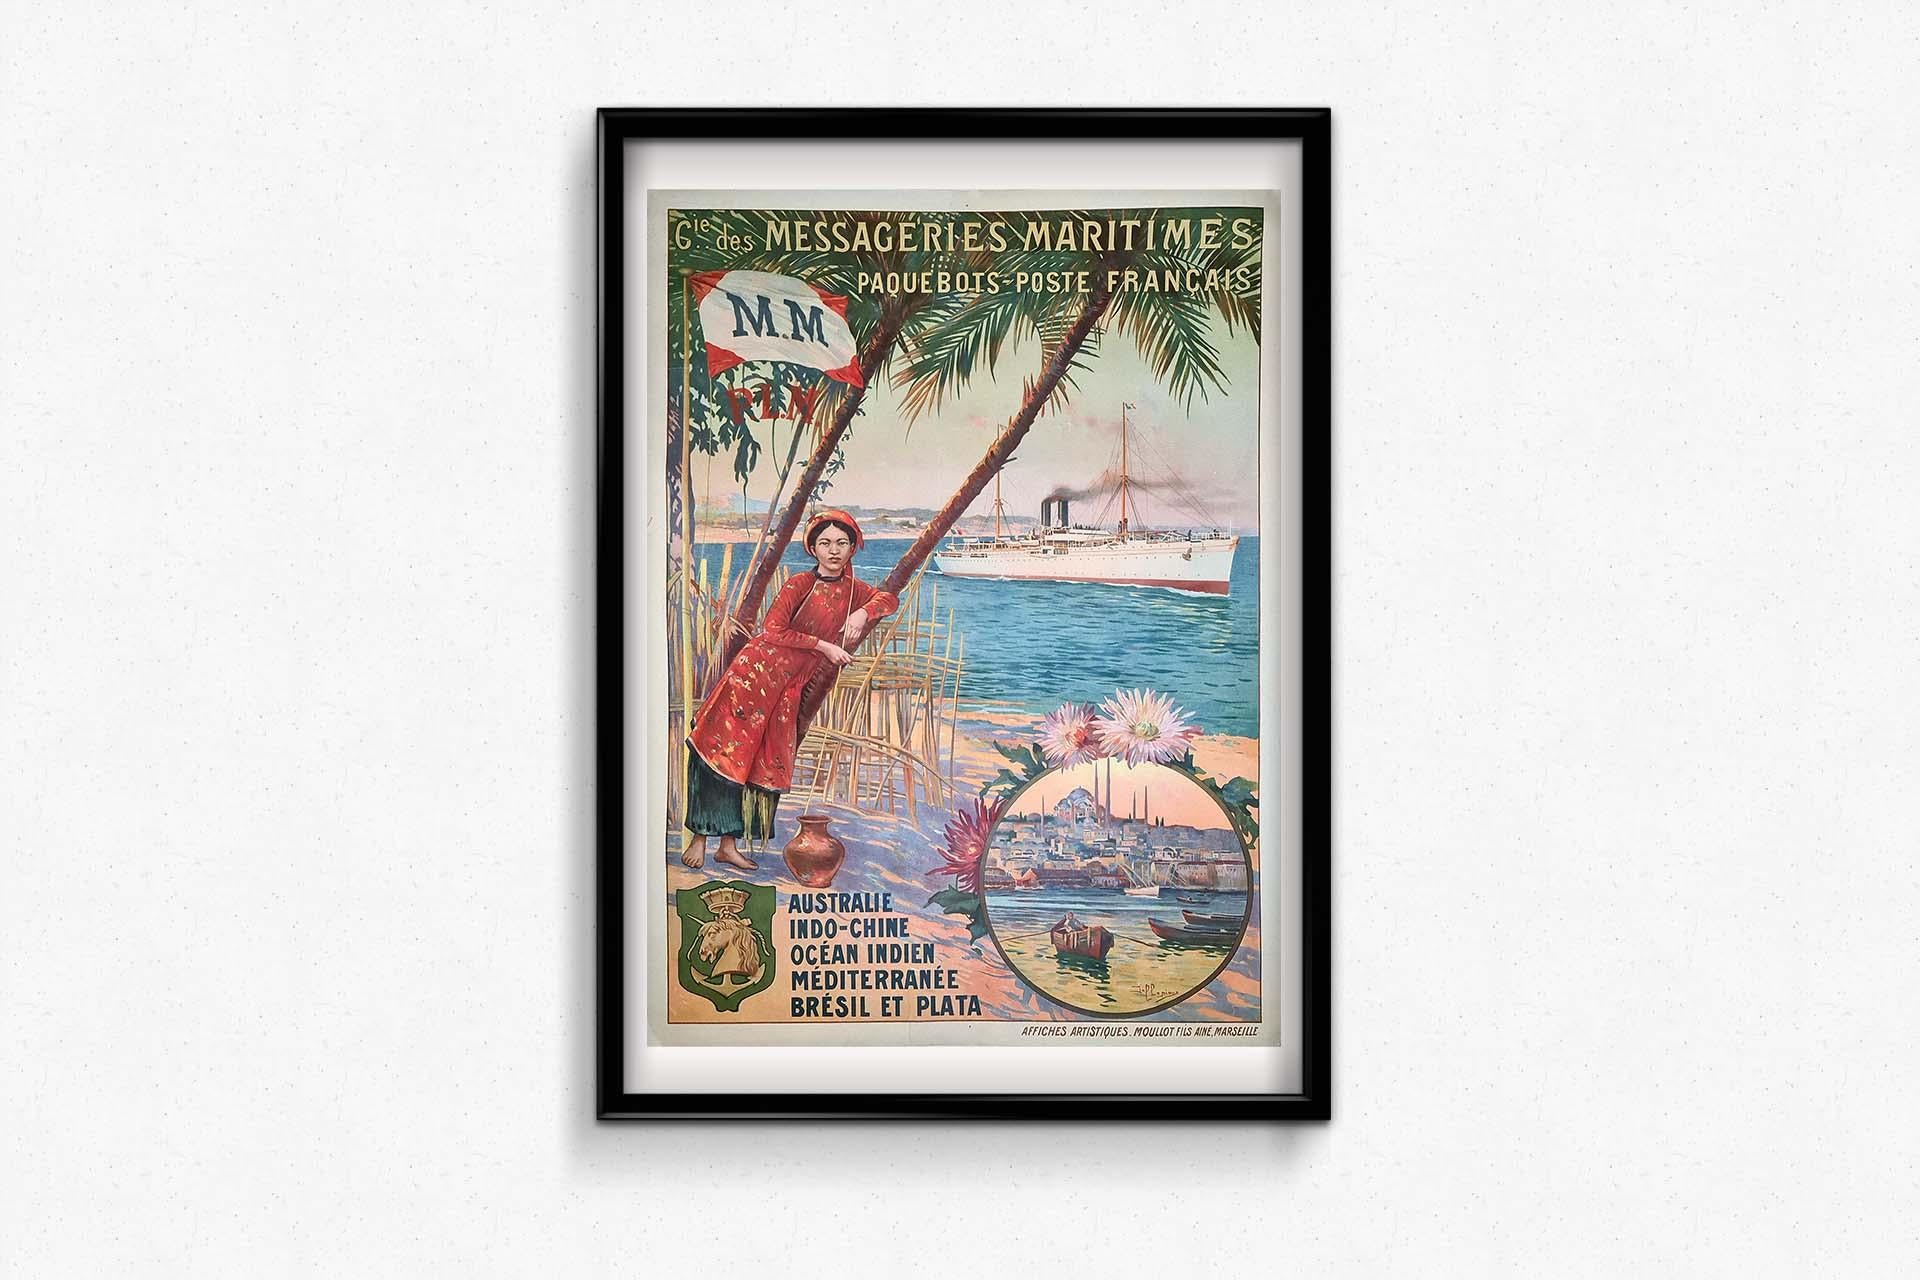 Circa 1910 Original travel poster for the Messageries Maritimes - Istanbul 1